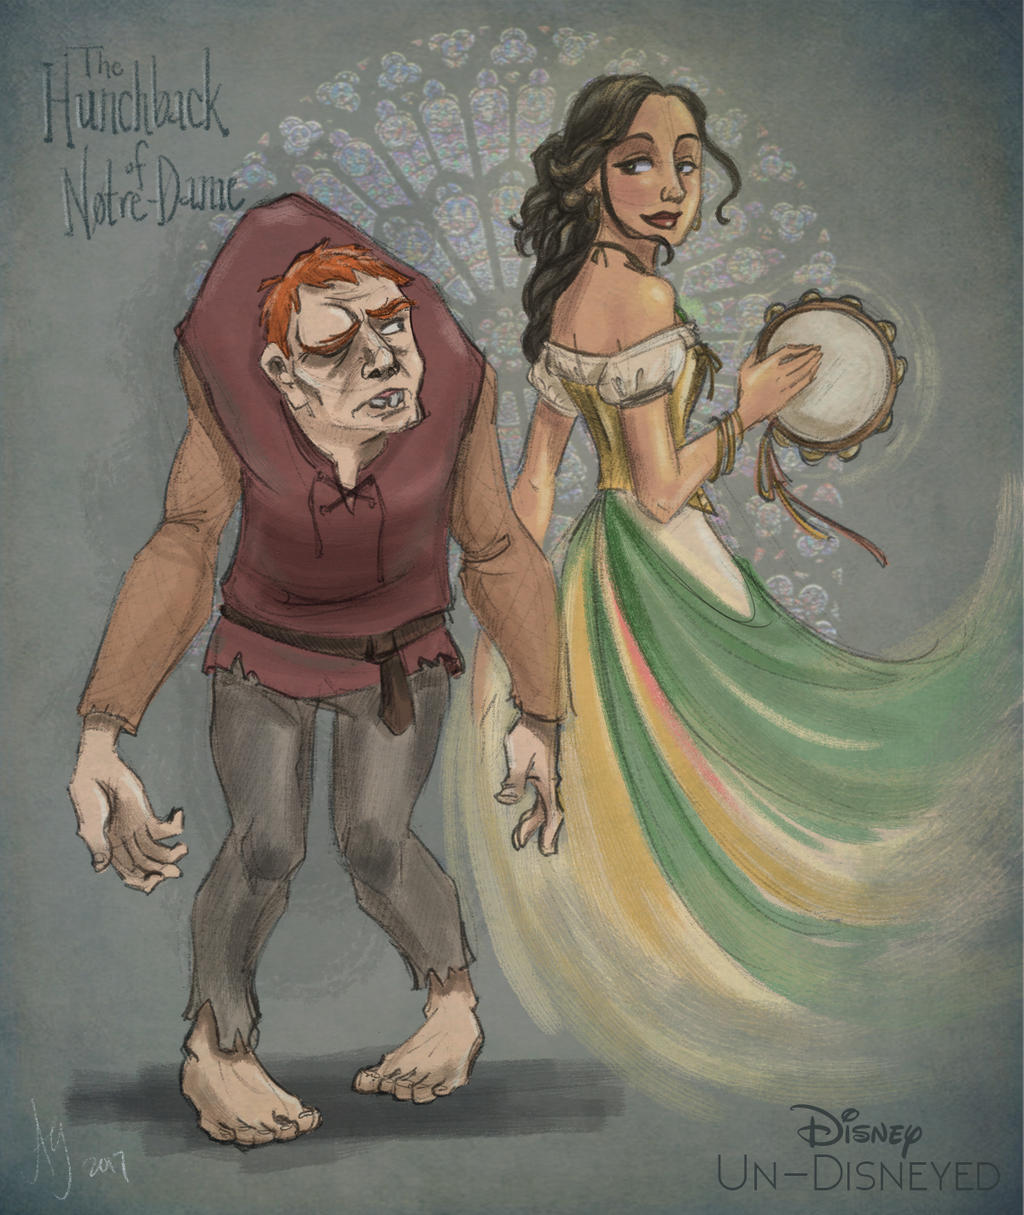 Disney Un-Disneyed: The Hunchback of Notre-Dame(P) by ...